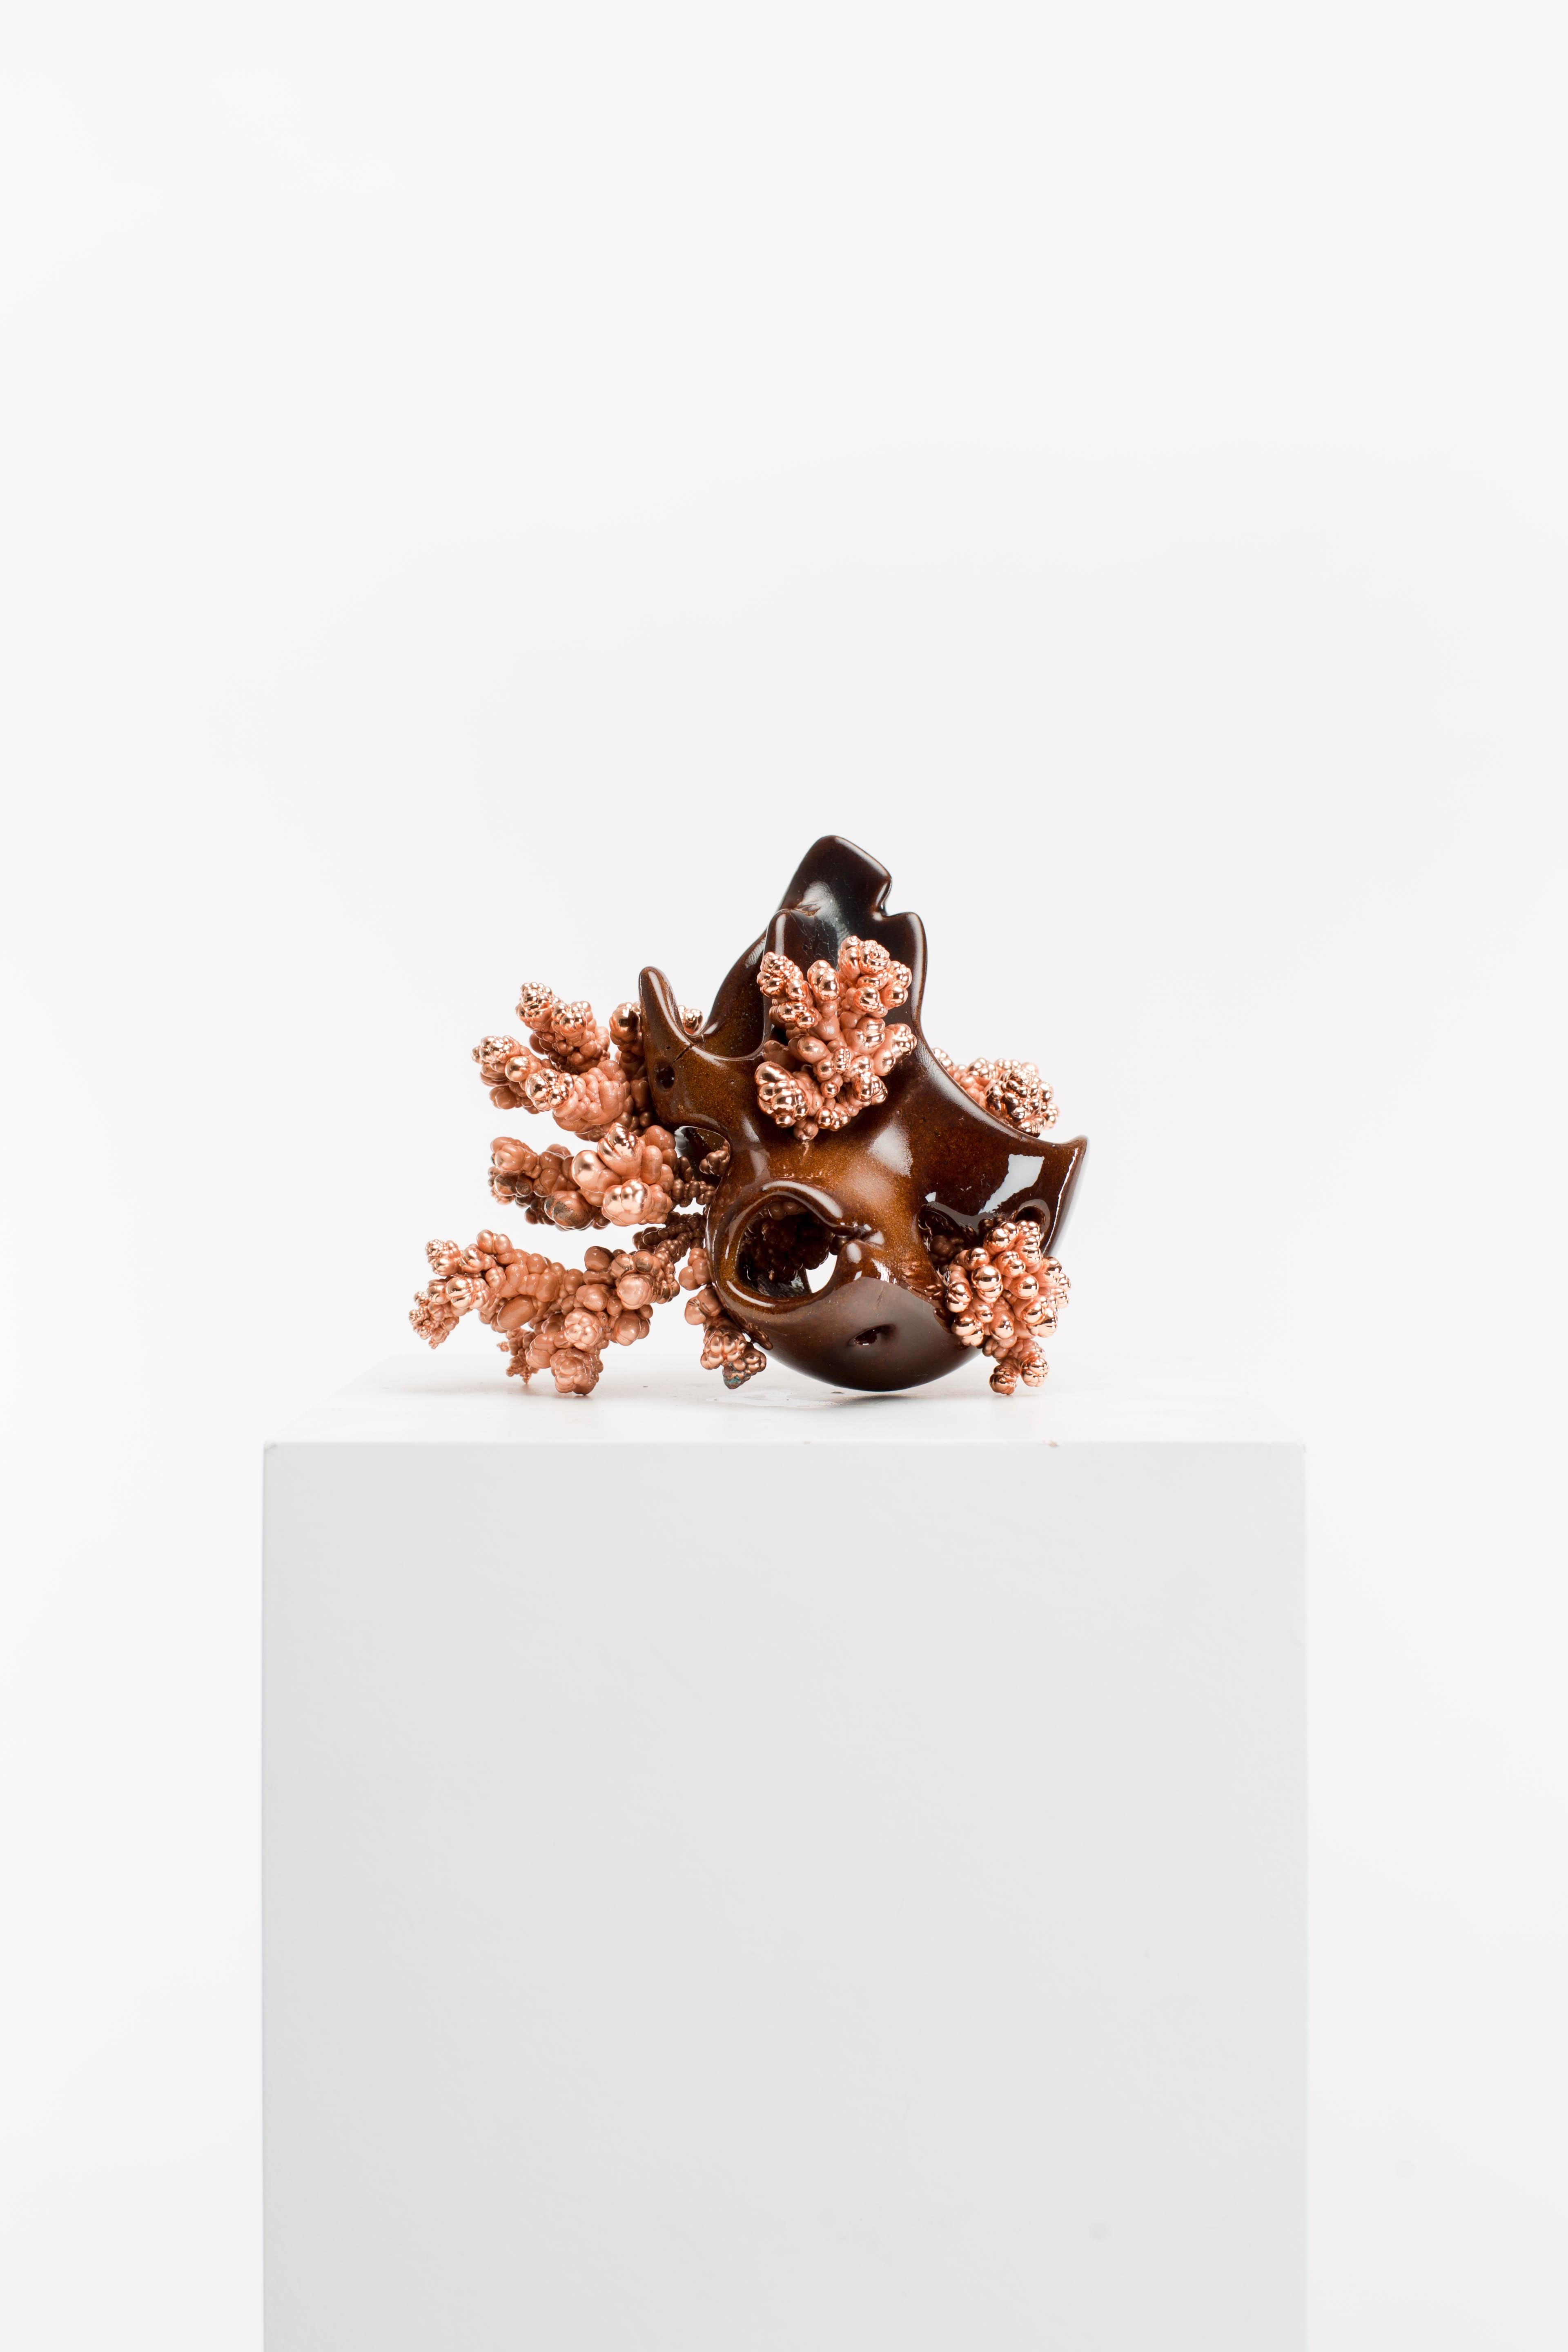 Driaan Claassen Abstract Sculpture - Copper, Polished, Ceramic, Abstract, Contemporary, Modern, Art, Sculpture